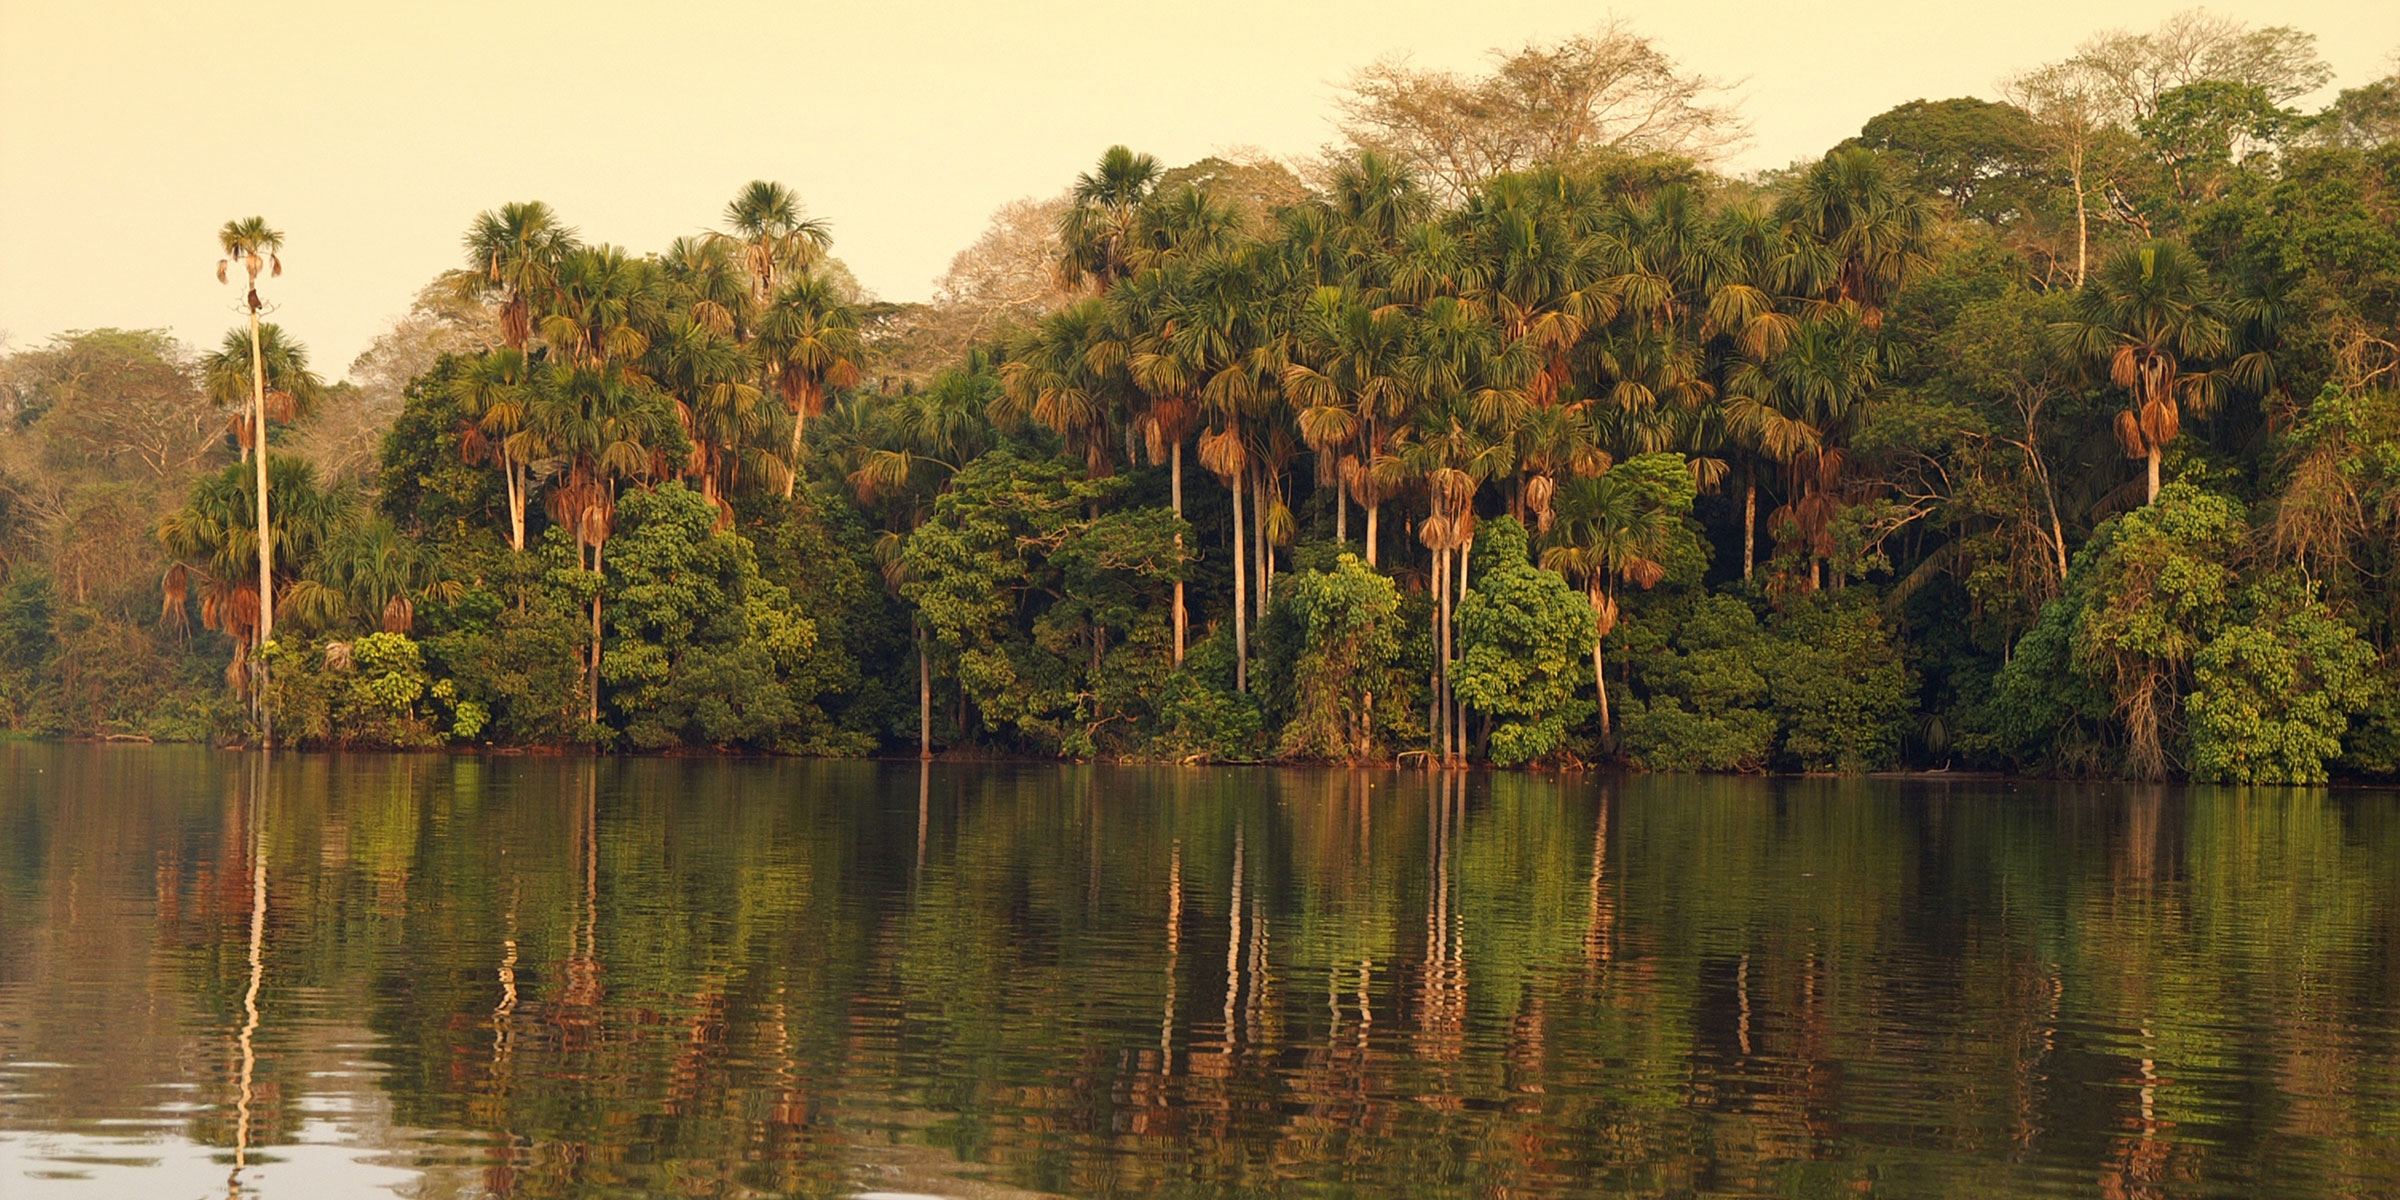 Tropical trees with green and orange fronds reflected in Sandoval Lake, Peru